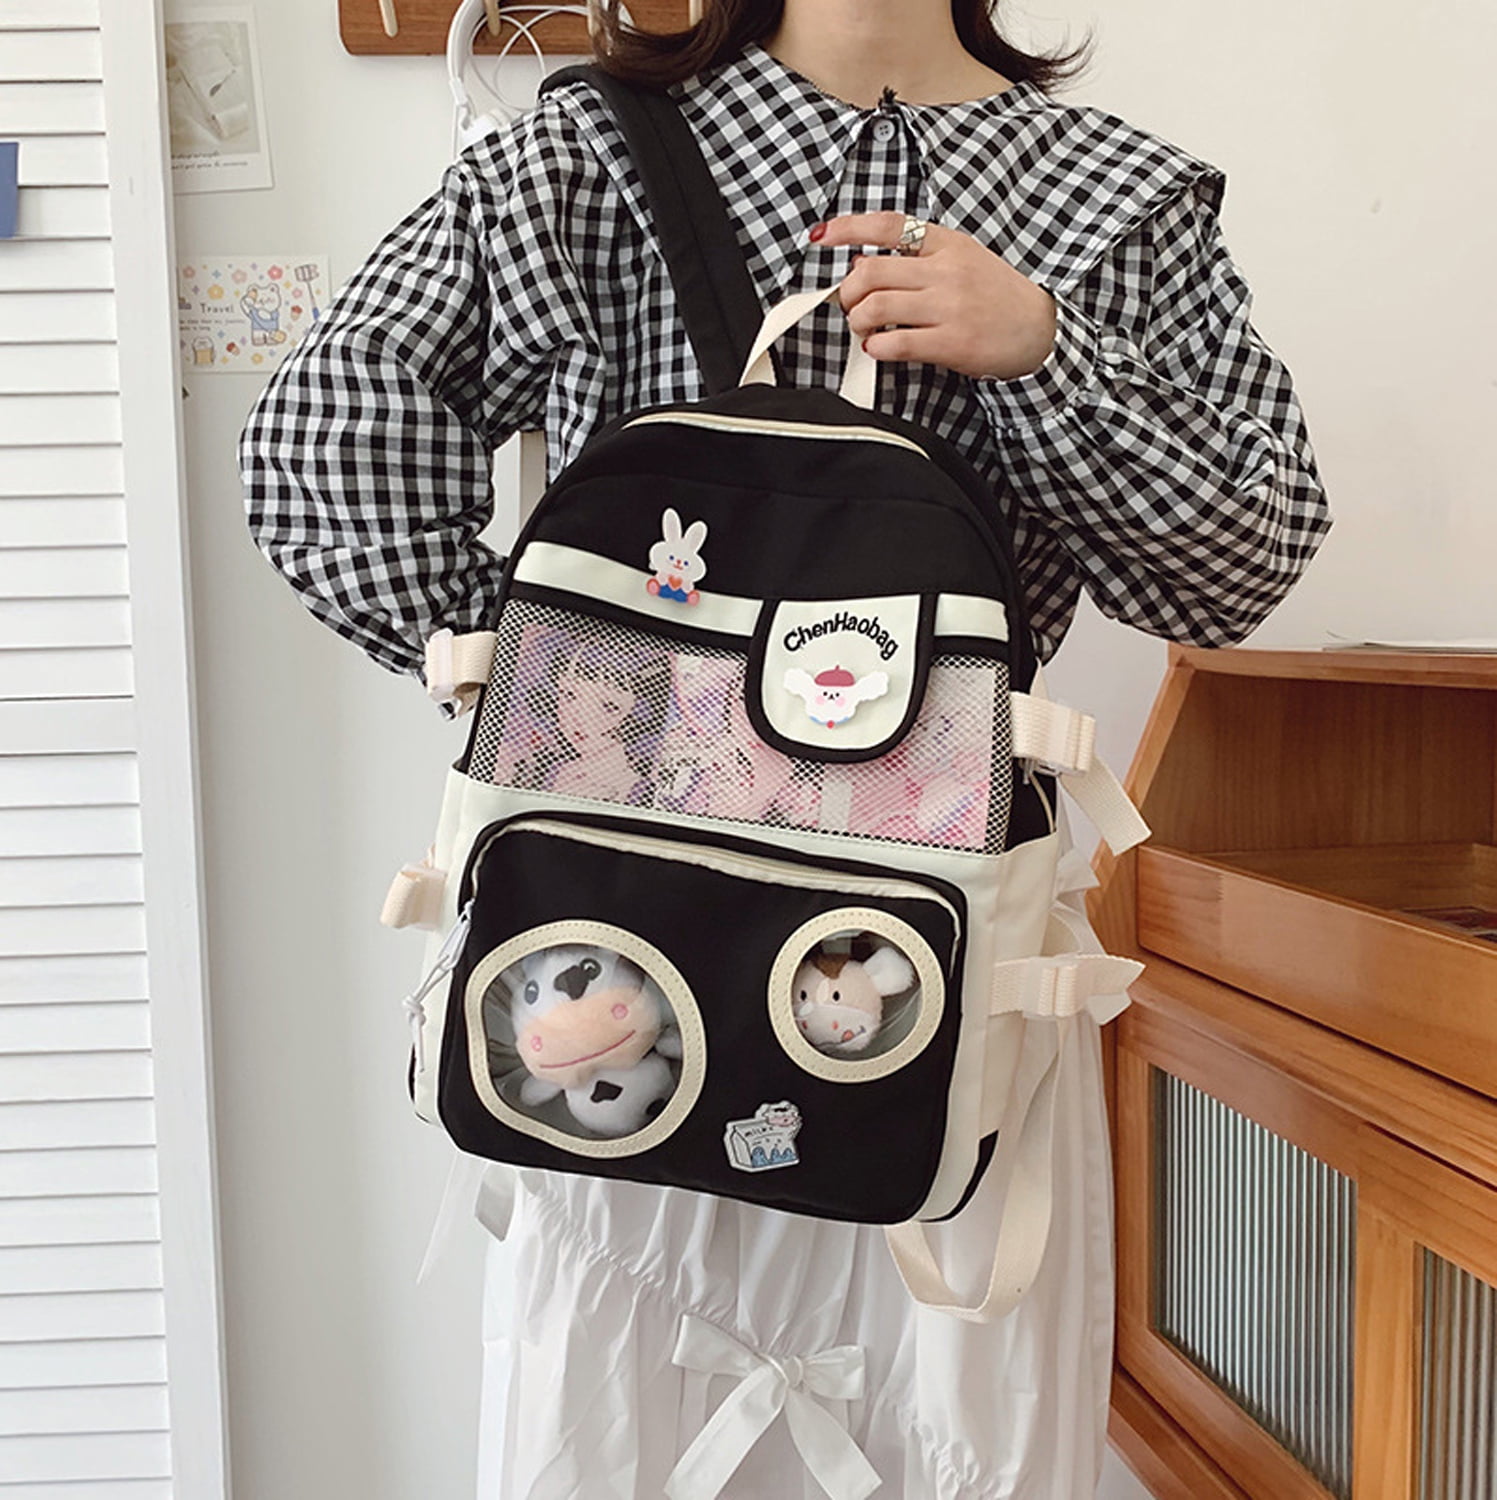 Kawaii Backpack For School Cute Aesthetic Kids Elementary Kindergarten With  Kawaii Pin And Accessories Chains Mochilas Escolares Para Niñas Toddler